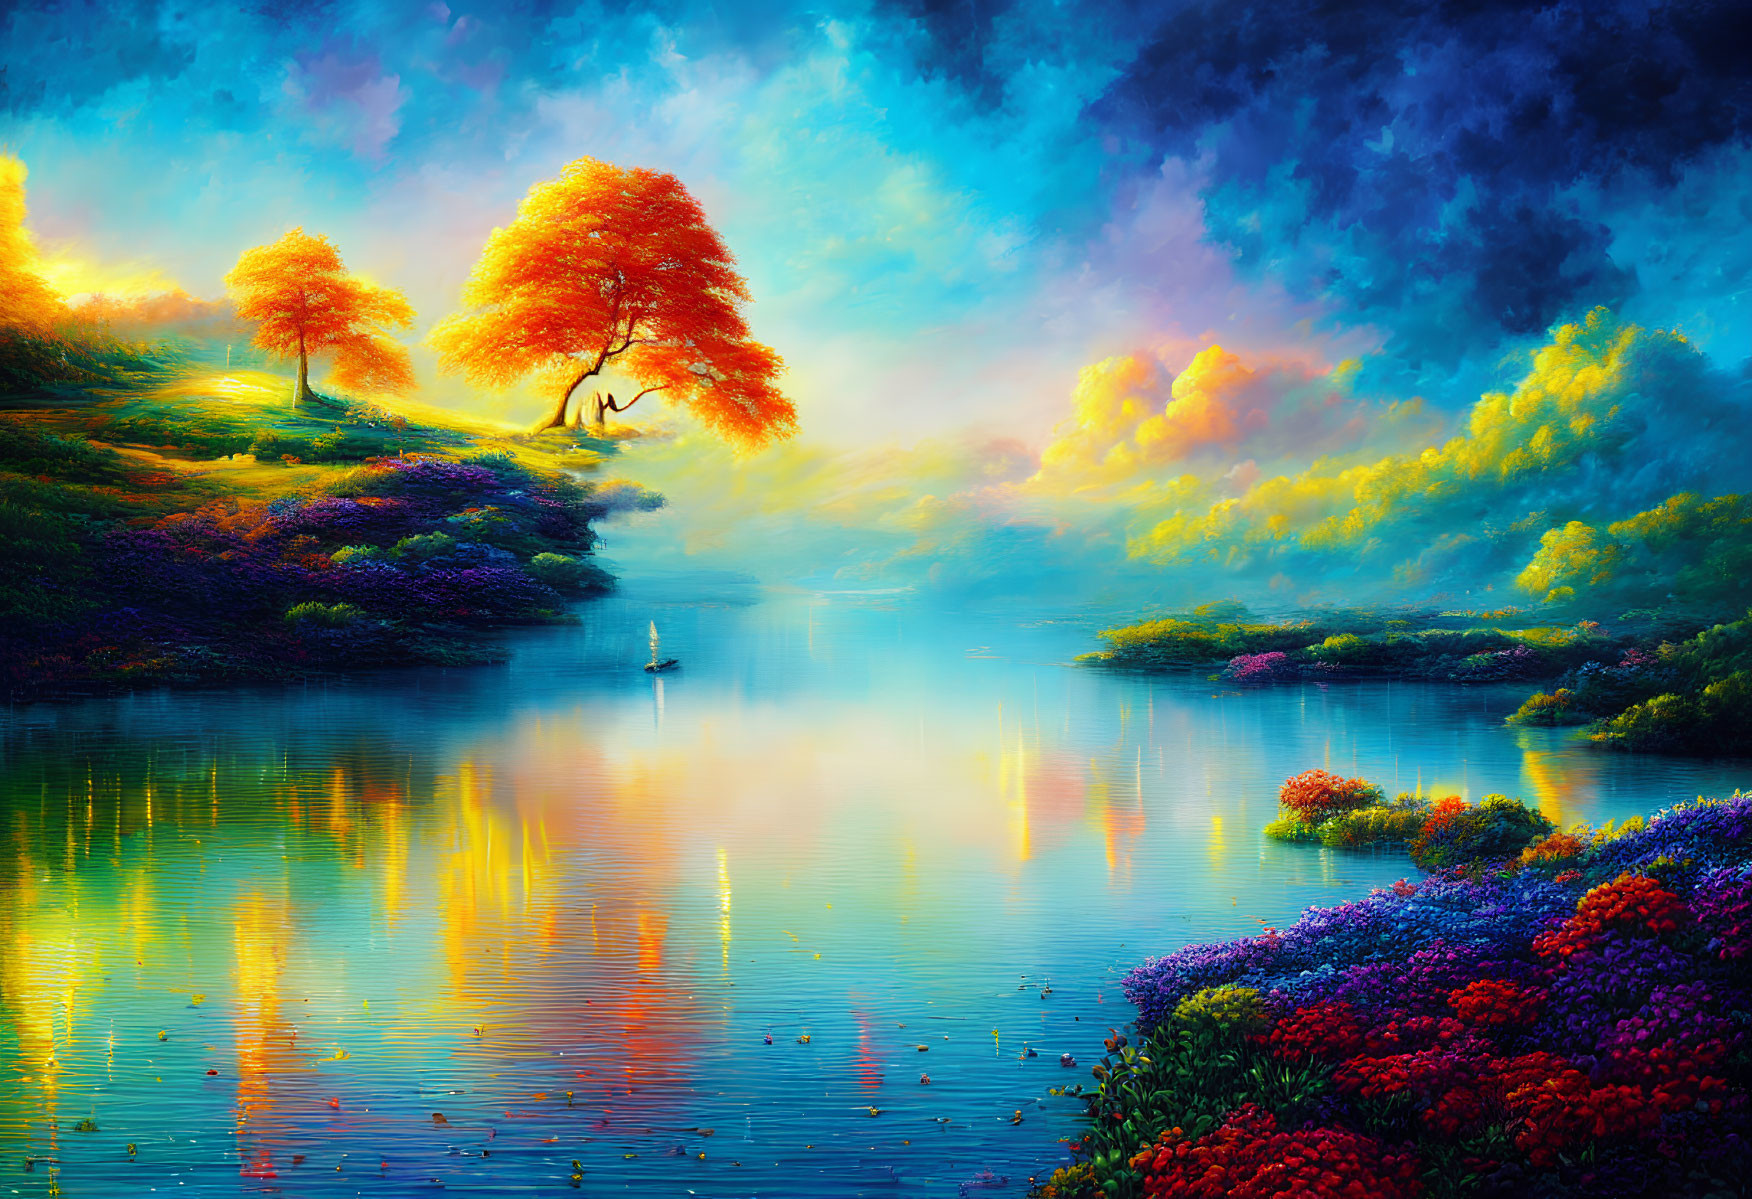 Colorful Landscape with Serene Lake and Autumn Trees